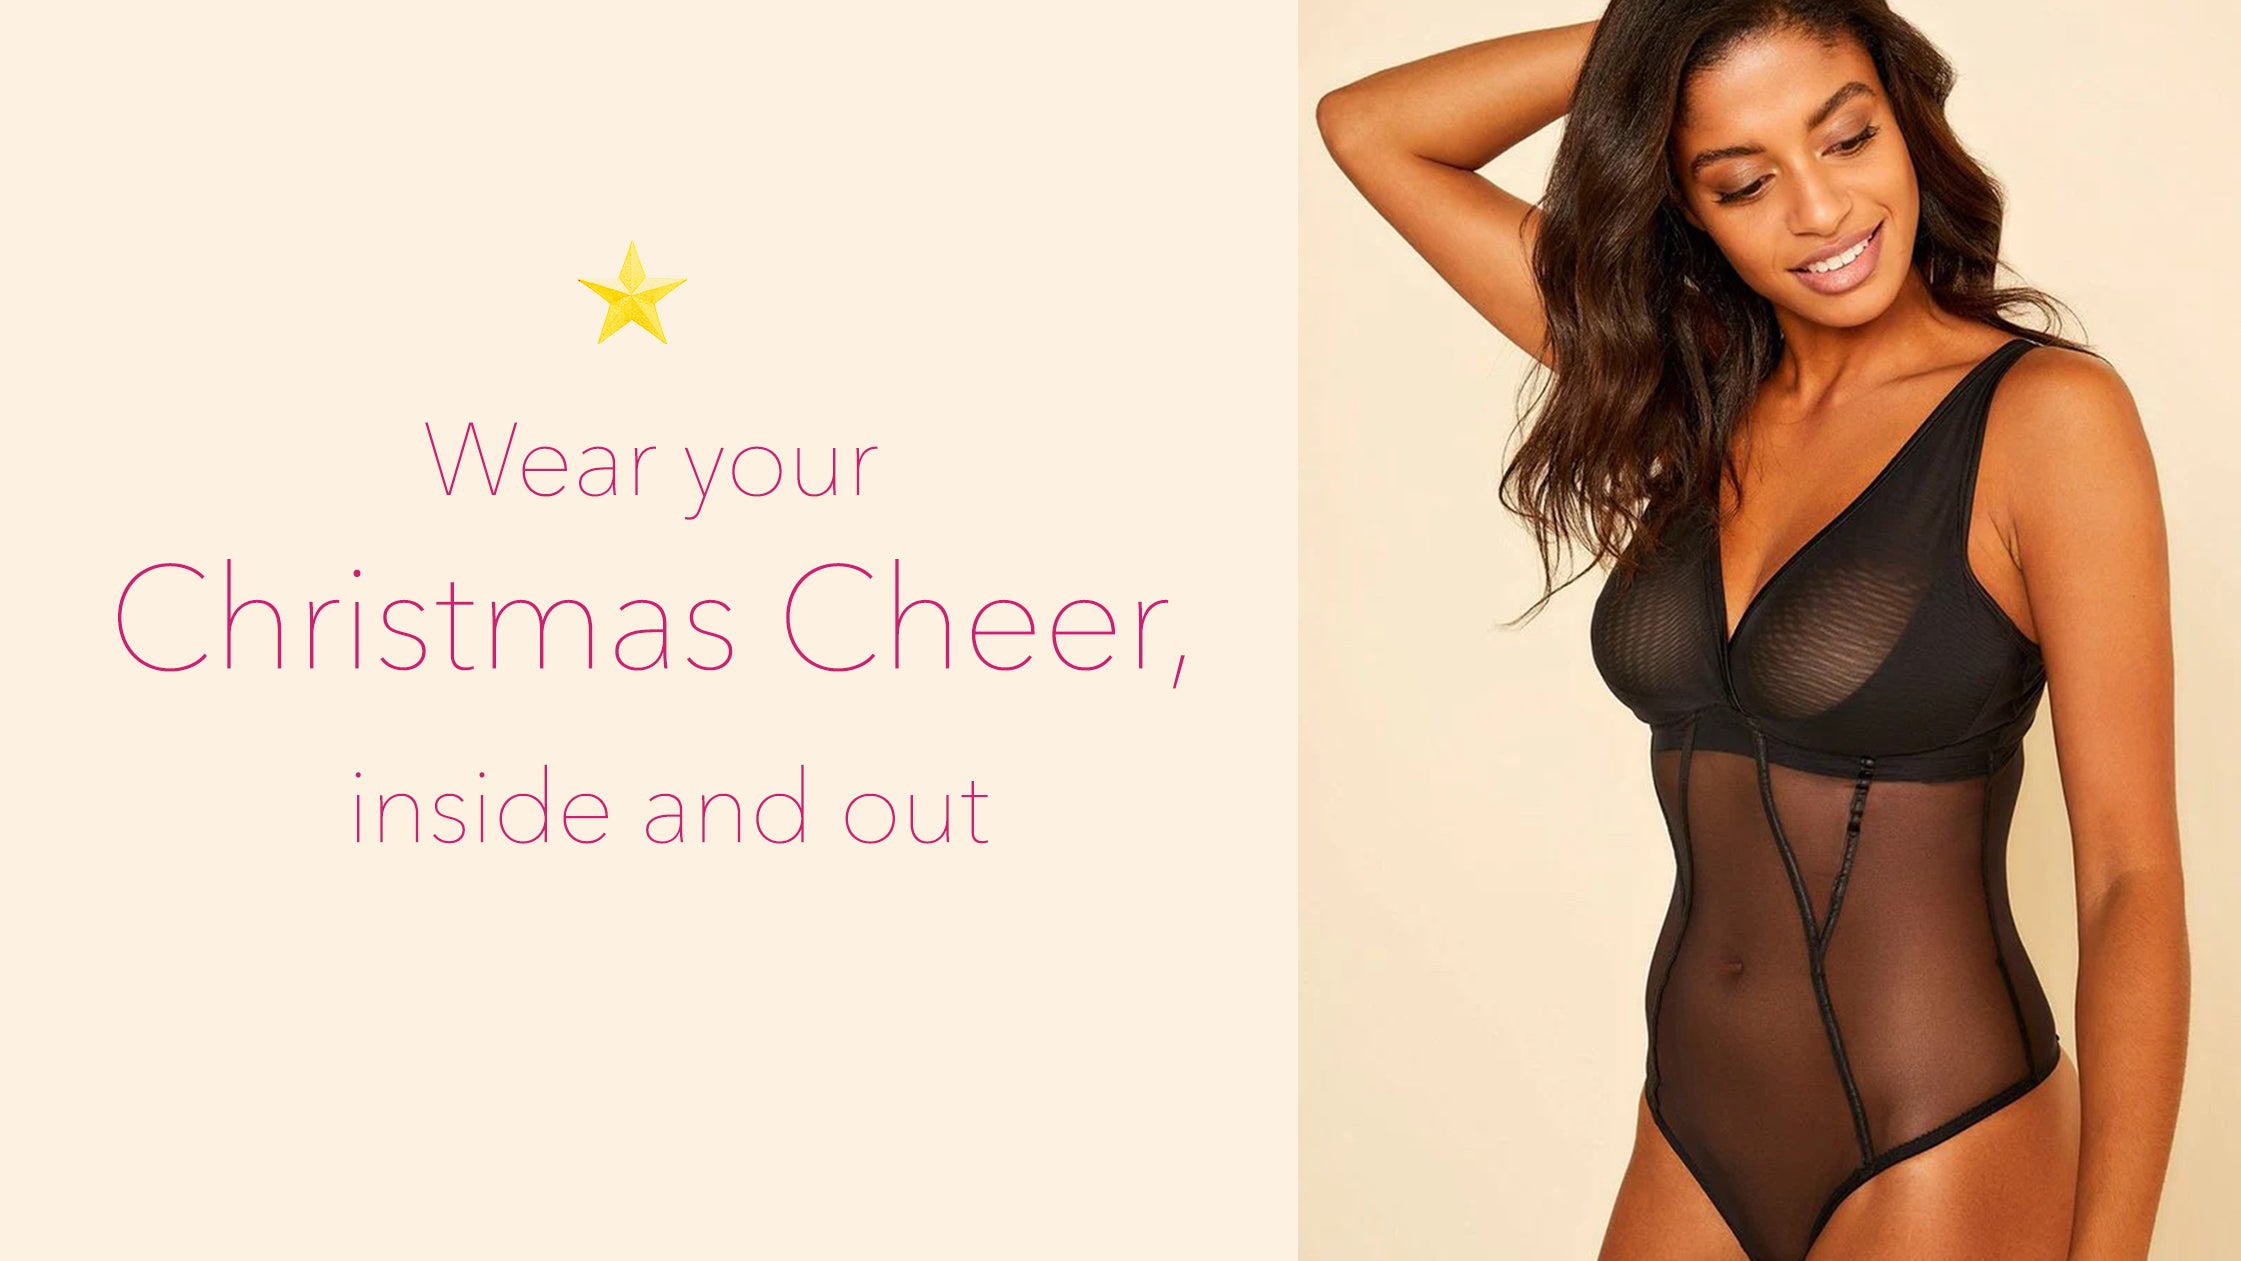 Wear your Christmas Cheer, inside and out: